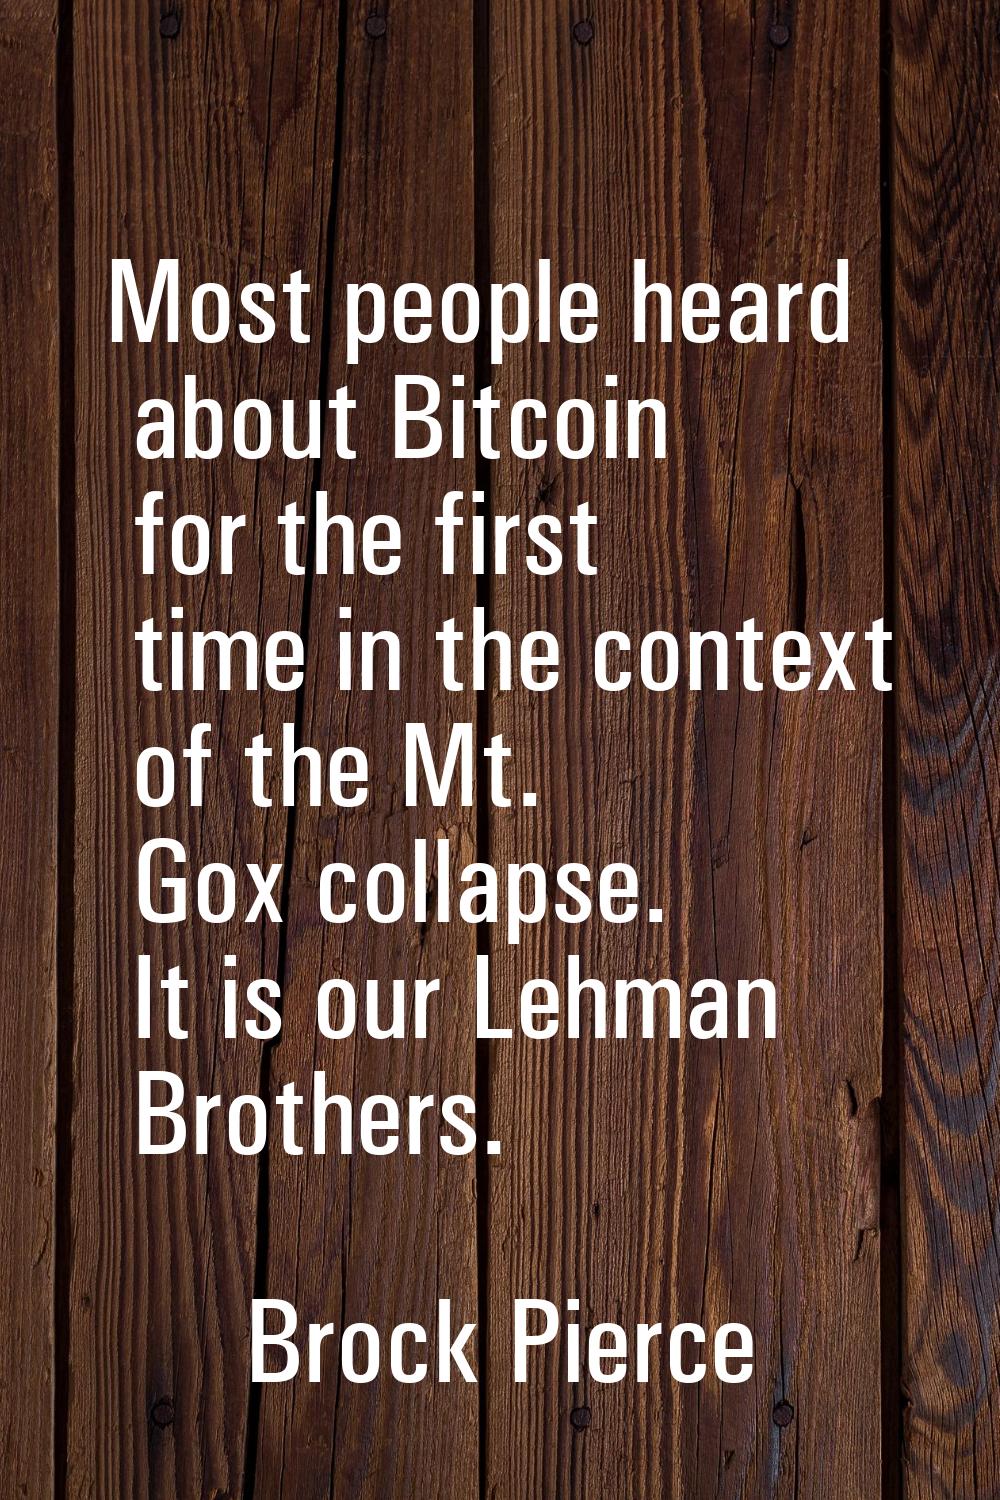 Most people heard about Bitcoin for the first time in the context of the Mt. Gox collapse. It is ou